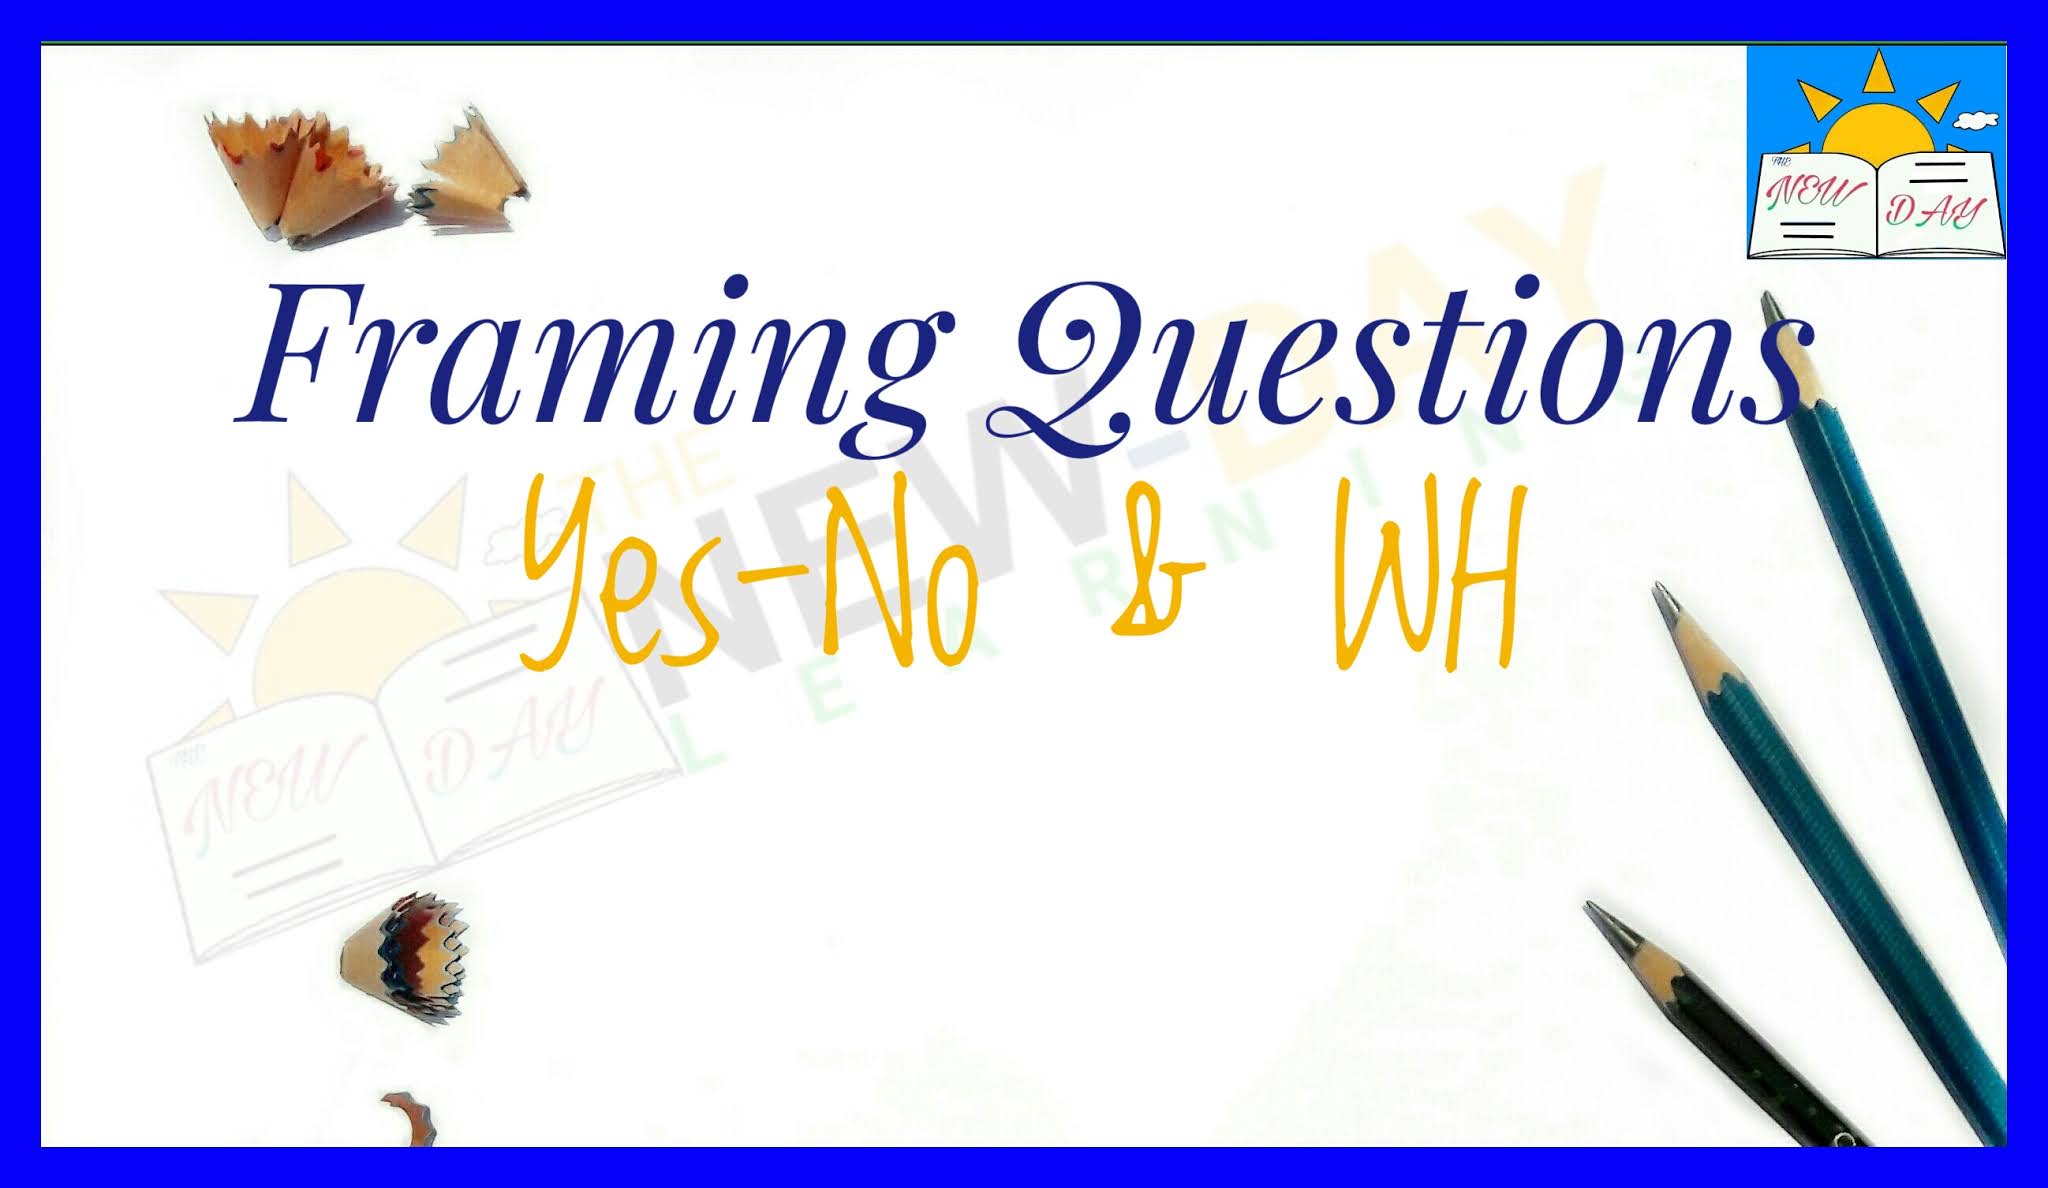 How to frame questions- Yes-No and WH